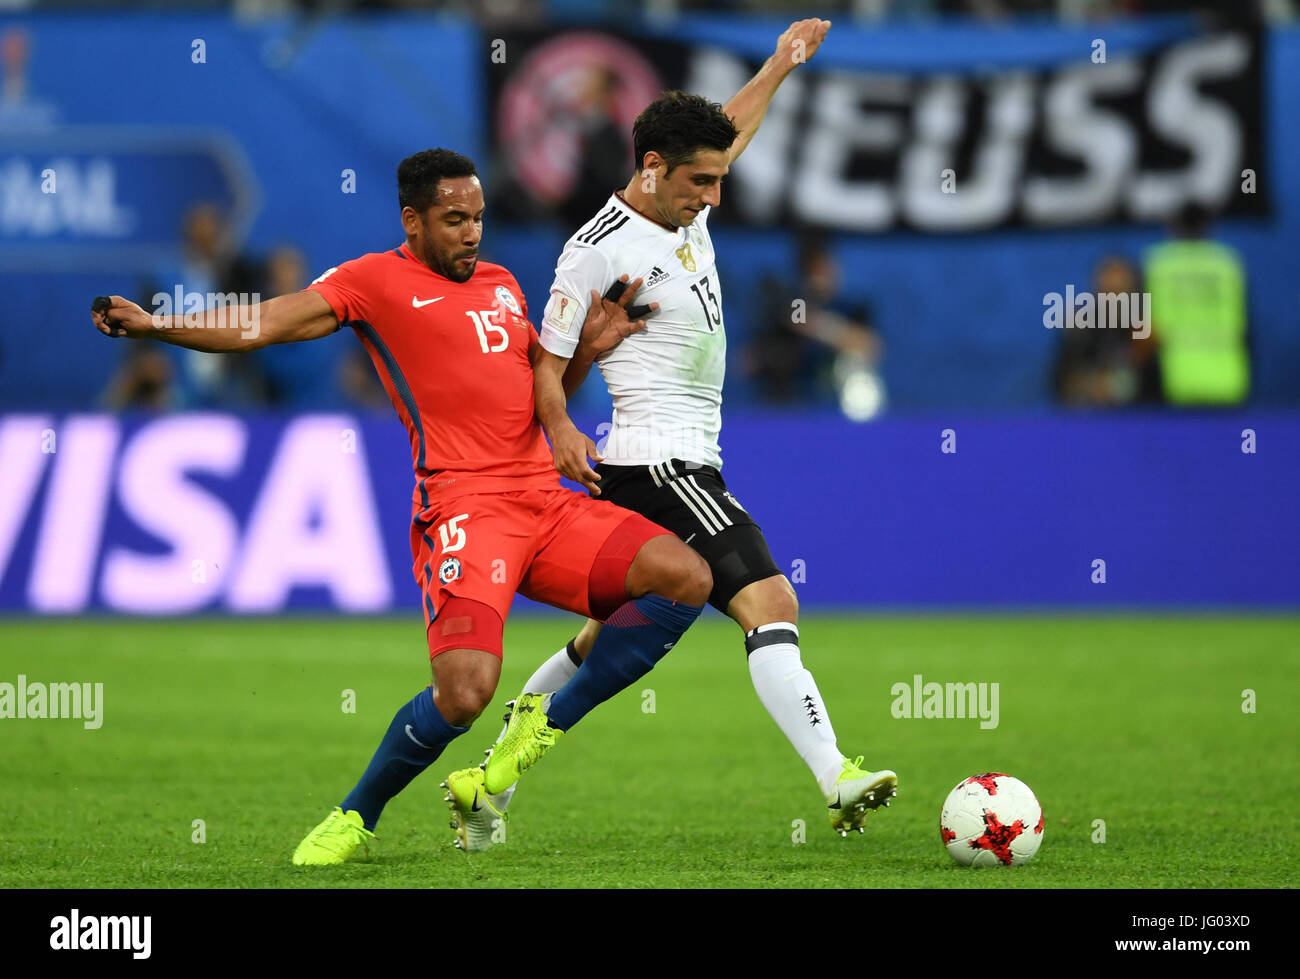 Saint Petersburg, Russia. 2nd July, 2017. Chile's Jean Beausejour (l) and Germany's Lars Stindl in action during the Confederations Cup finale between Chile and Germany at the Saint Petersburg Stadium in Saint Petersburg, Russia, 2 July 2017. Photo: Marius Becker/dpa/Alamy Live News Stock Photo